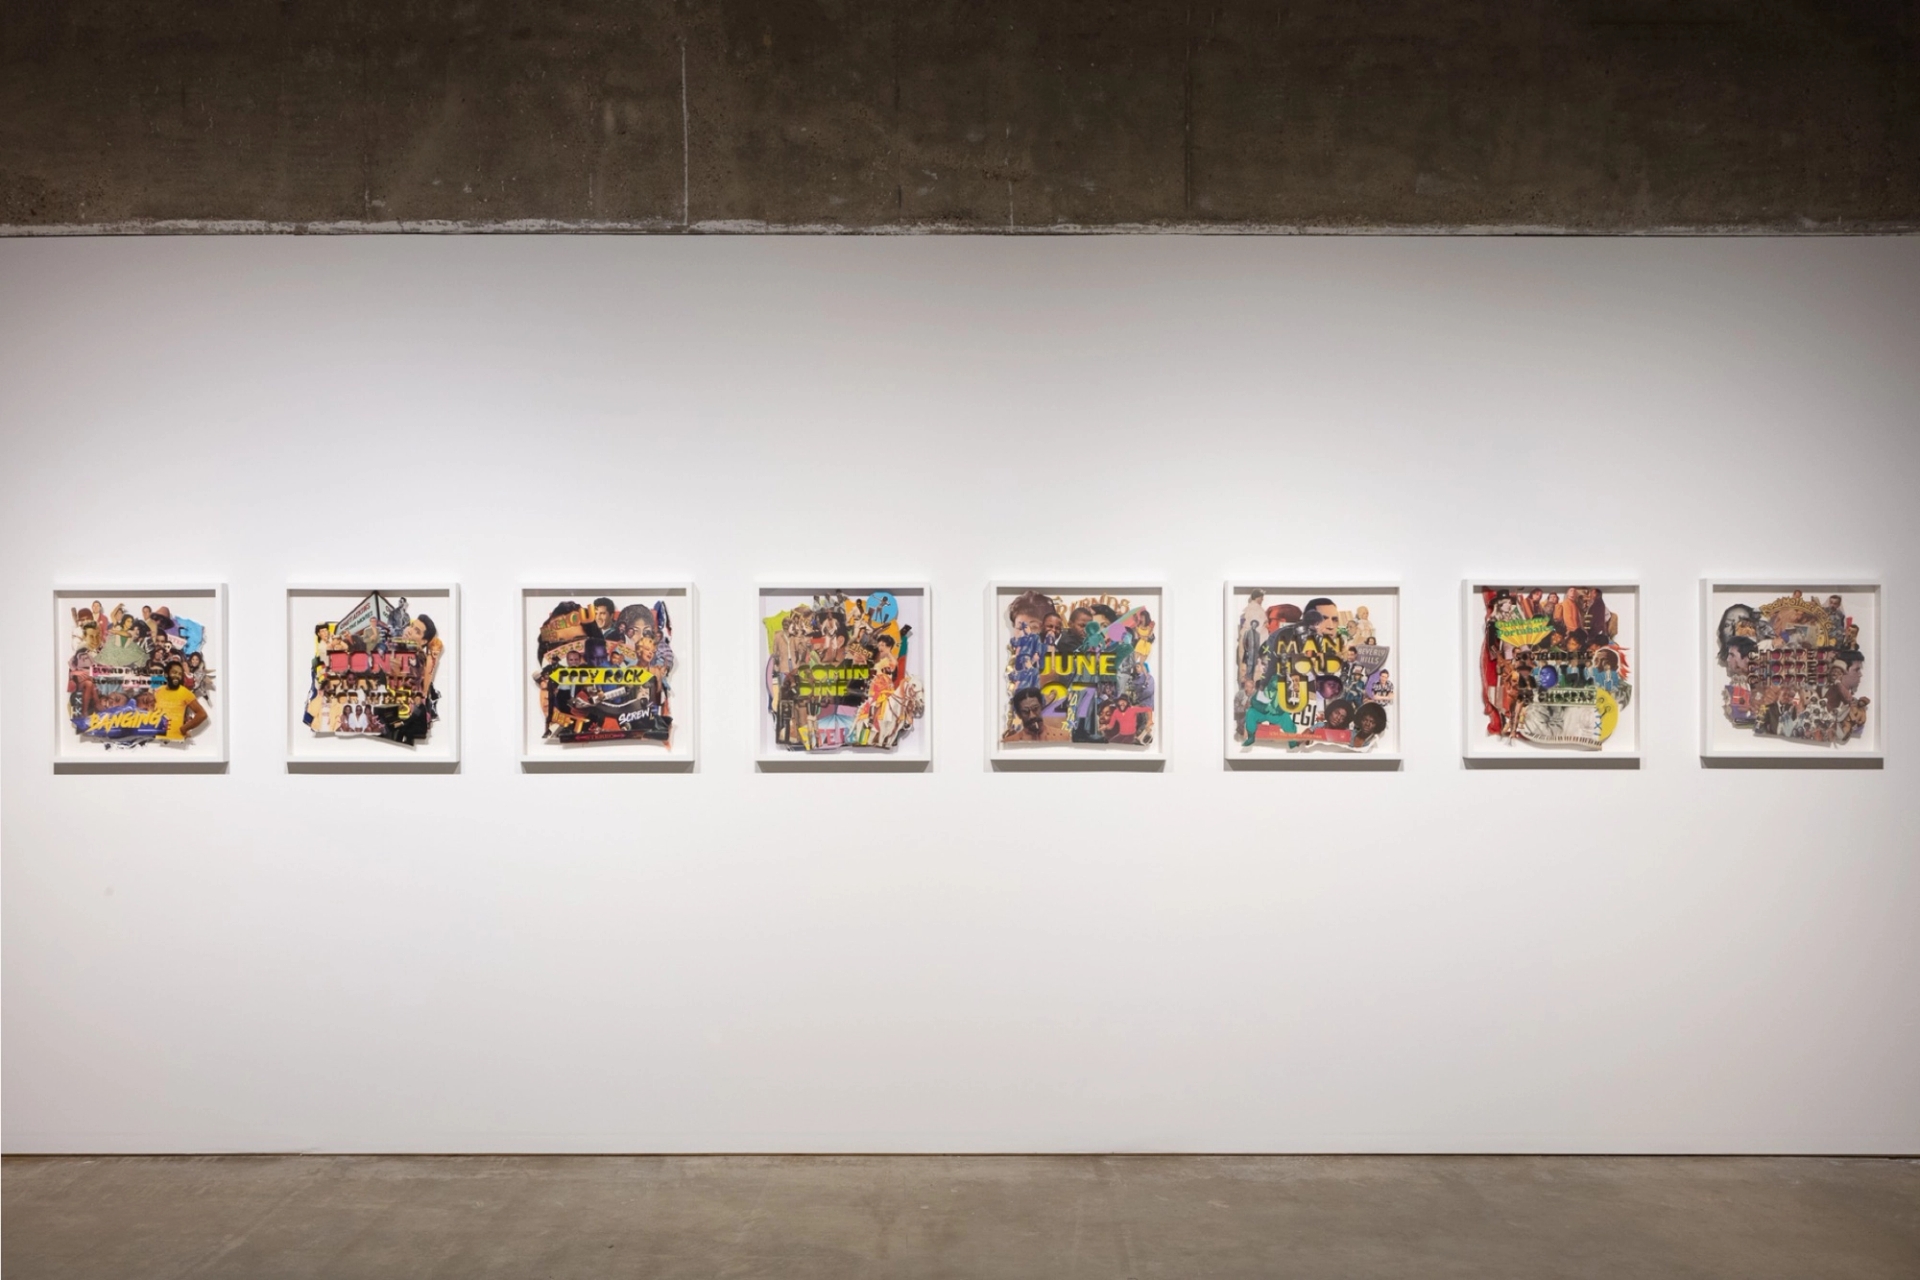 Mixed media collages by Robert Hodge, in "Slowed and Throwed: Records of the City through Mutated Lenses," installation view. Photo: Emily Peacock, 2020; courtesy of the Contemporary Art Museum of Houston (CAMH)